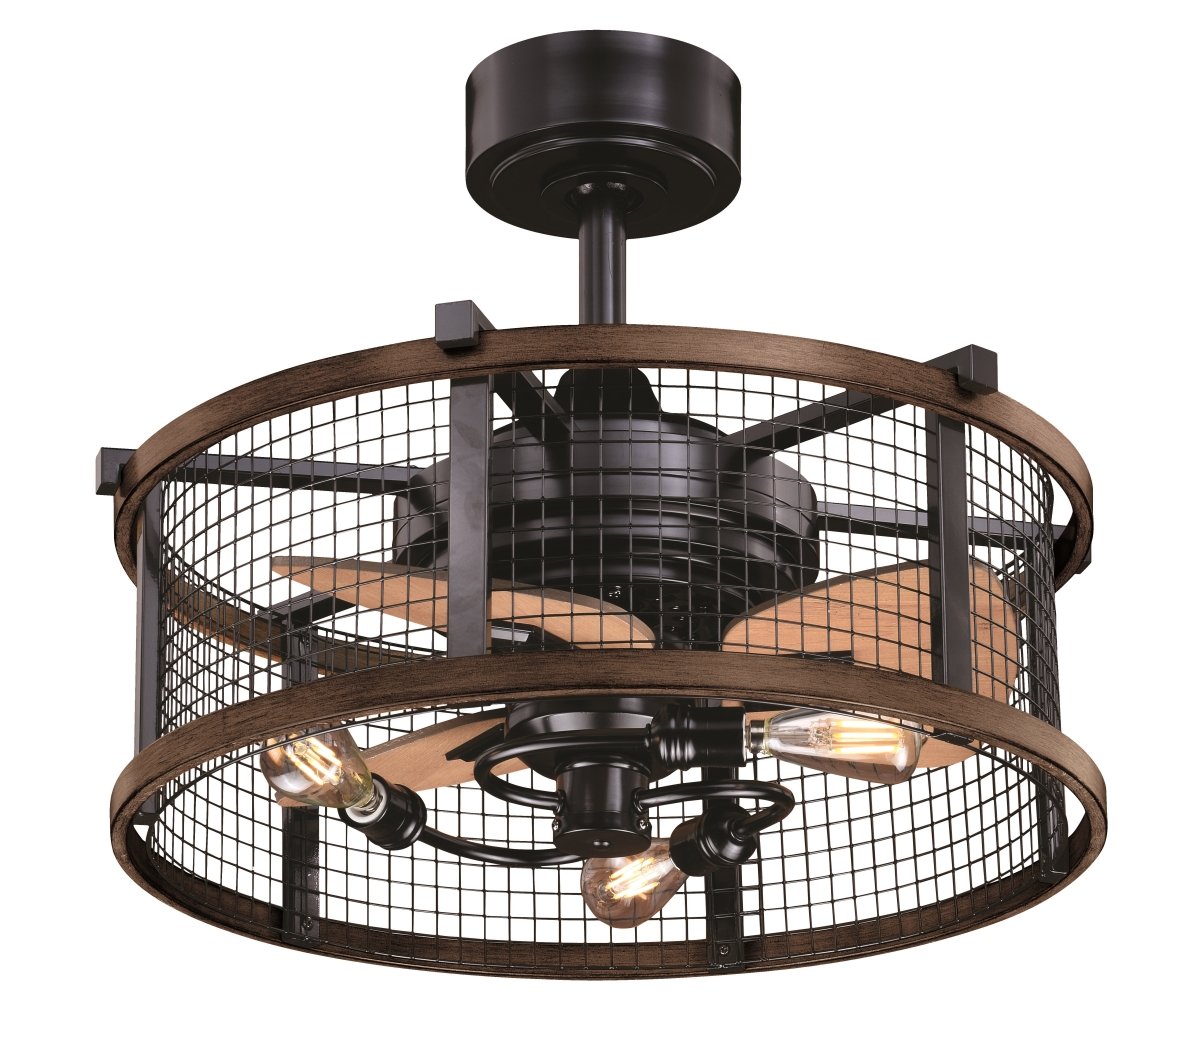 Picture of Vaxcel International F0061 21 in. Humboldt Ceiling Fan in Oil Rubbed Bronze & Burnished Teak